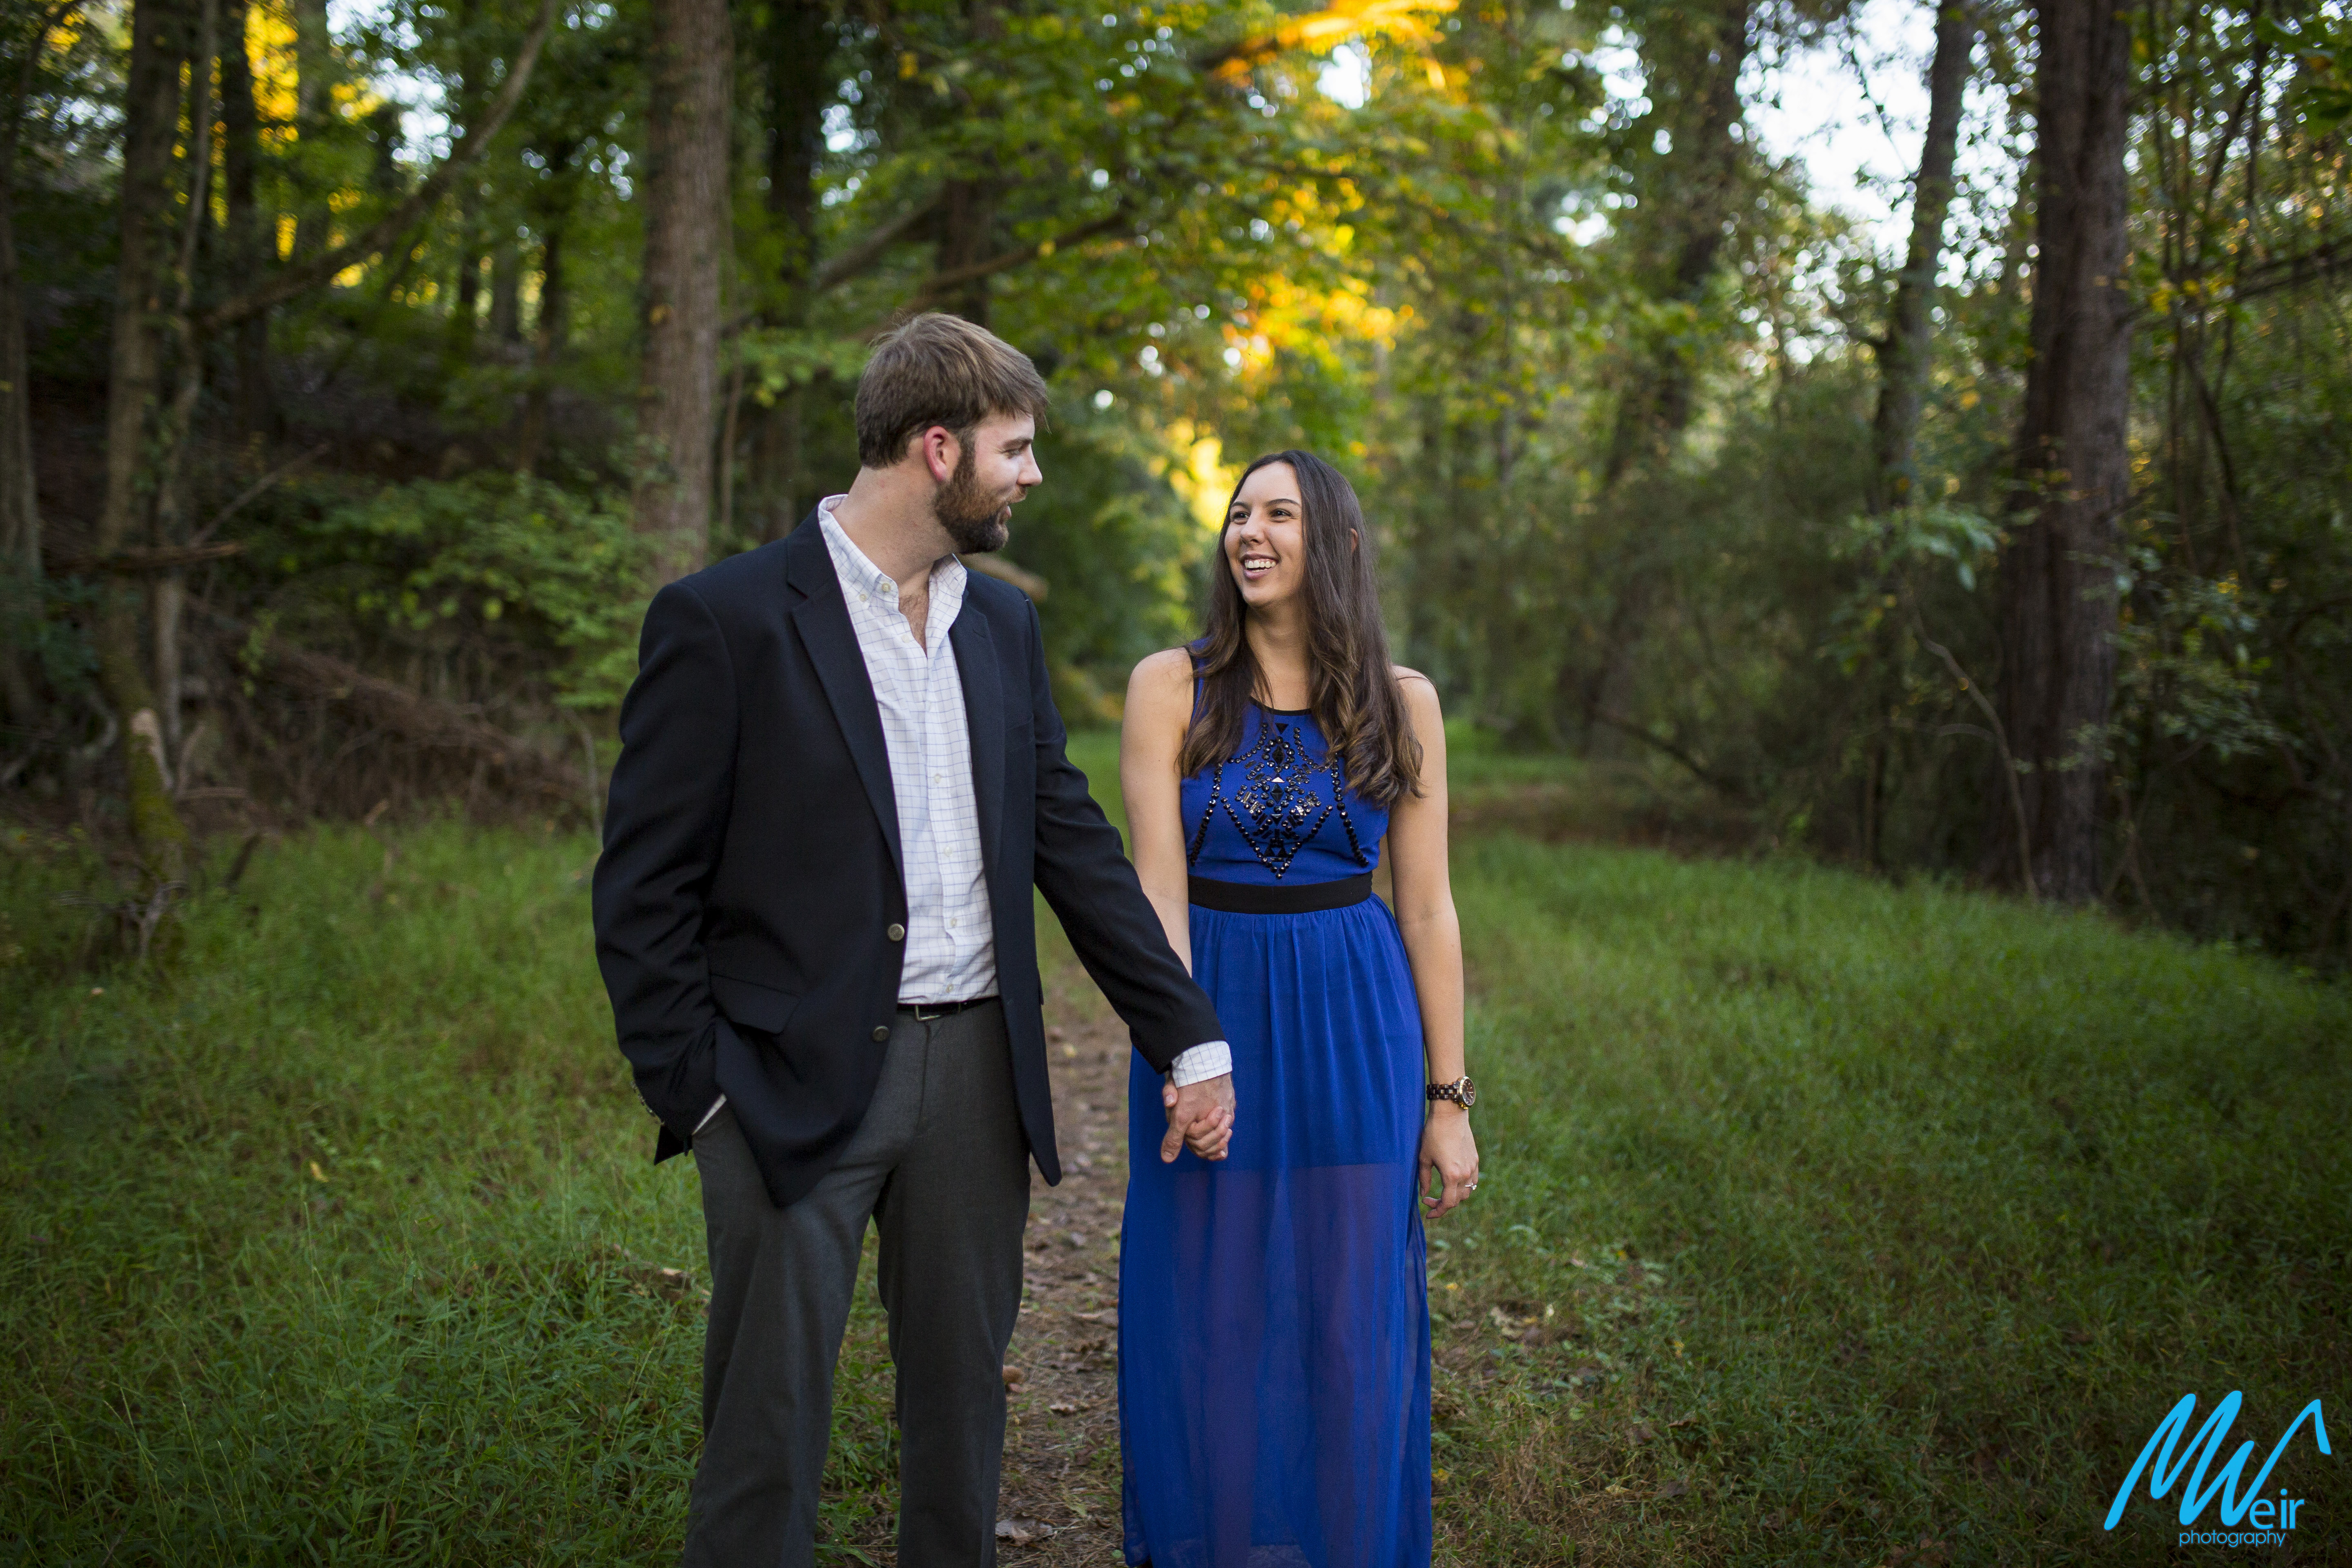 engaged couple walking through the woods together in blue dress